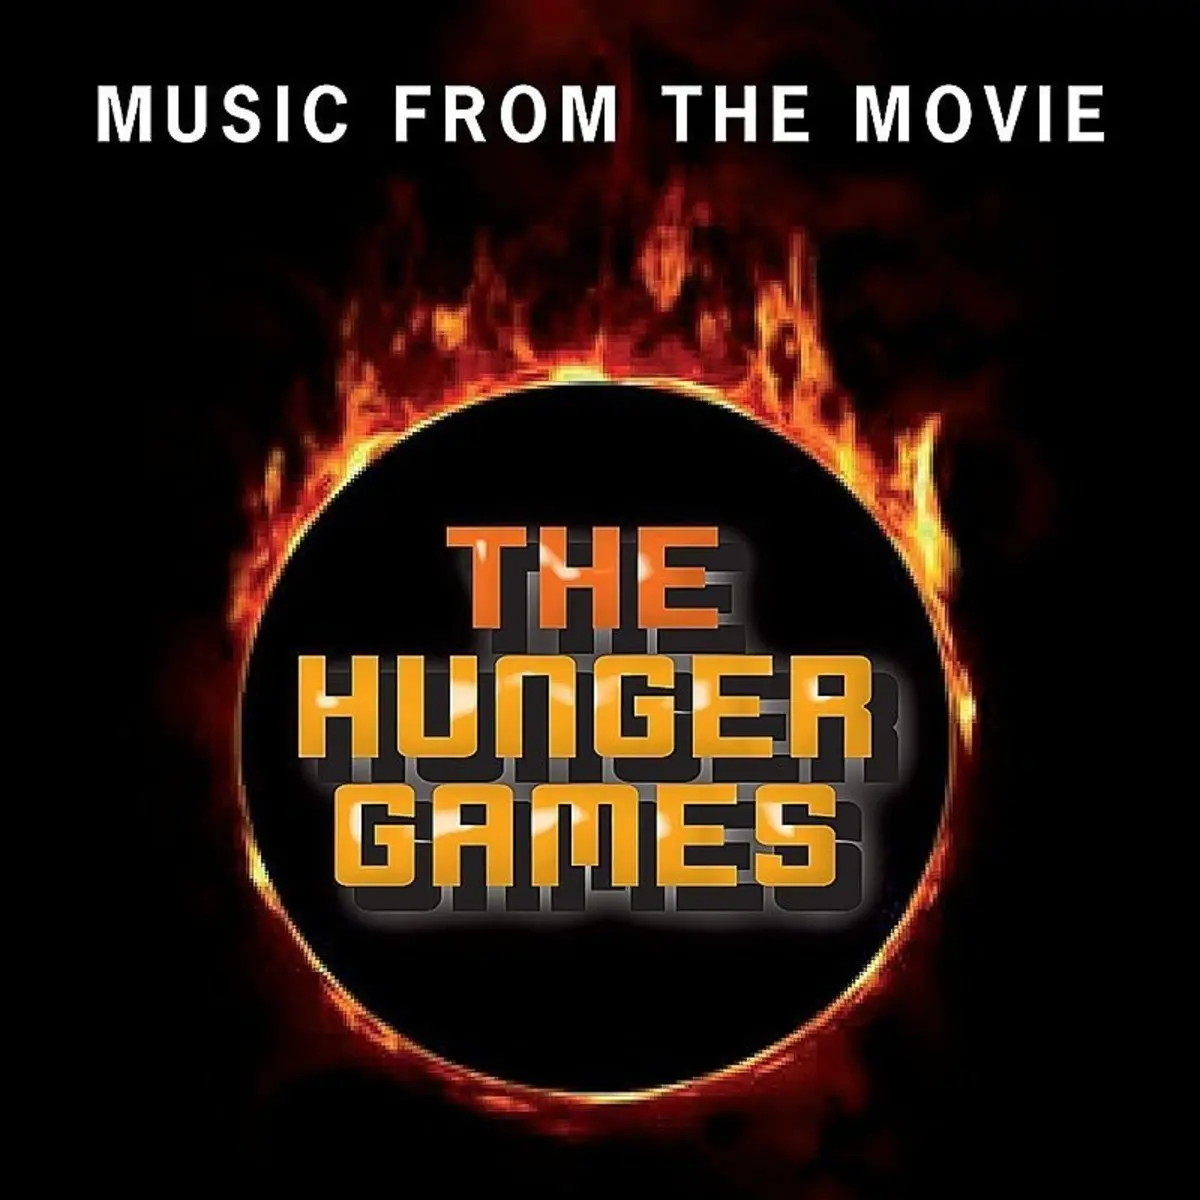 The Countdown Mp3 Song Download Music From The Movie The Hunger Games The Countdown Song By L Orchestra Cinematique On Gaana Com